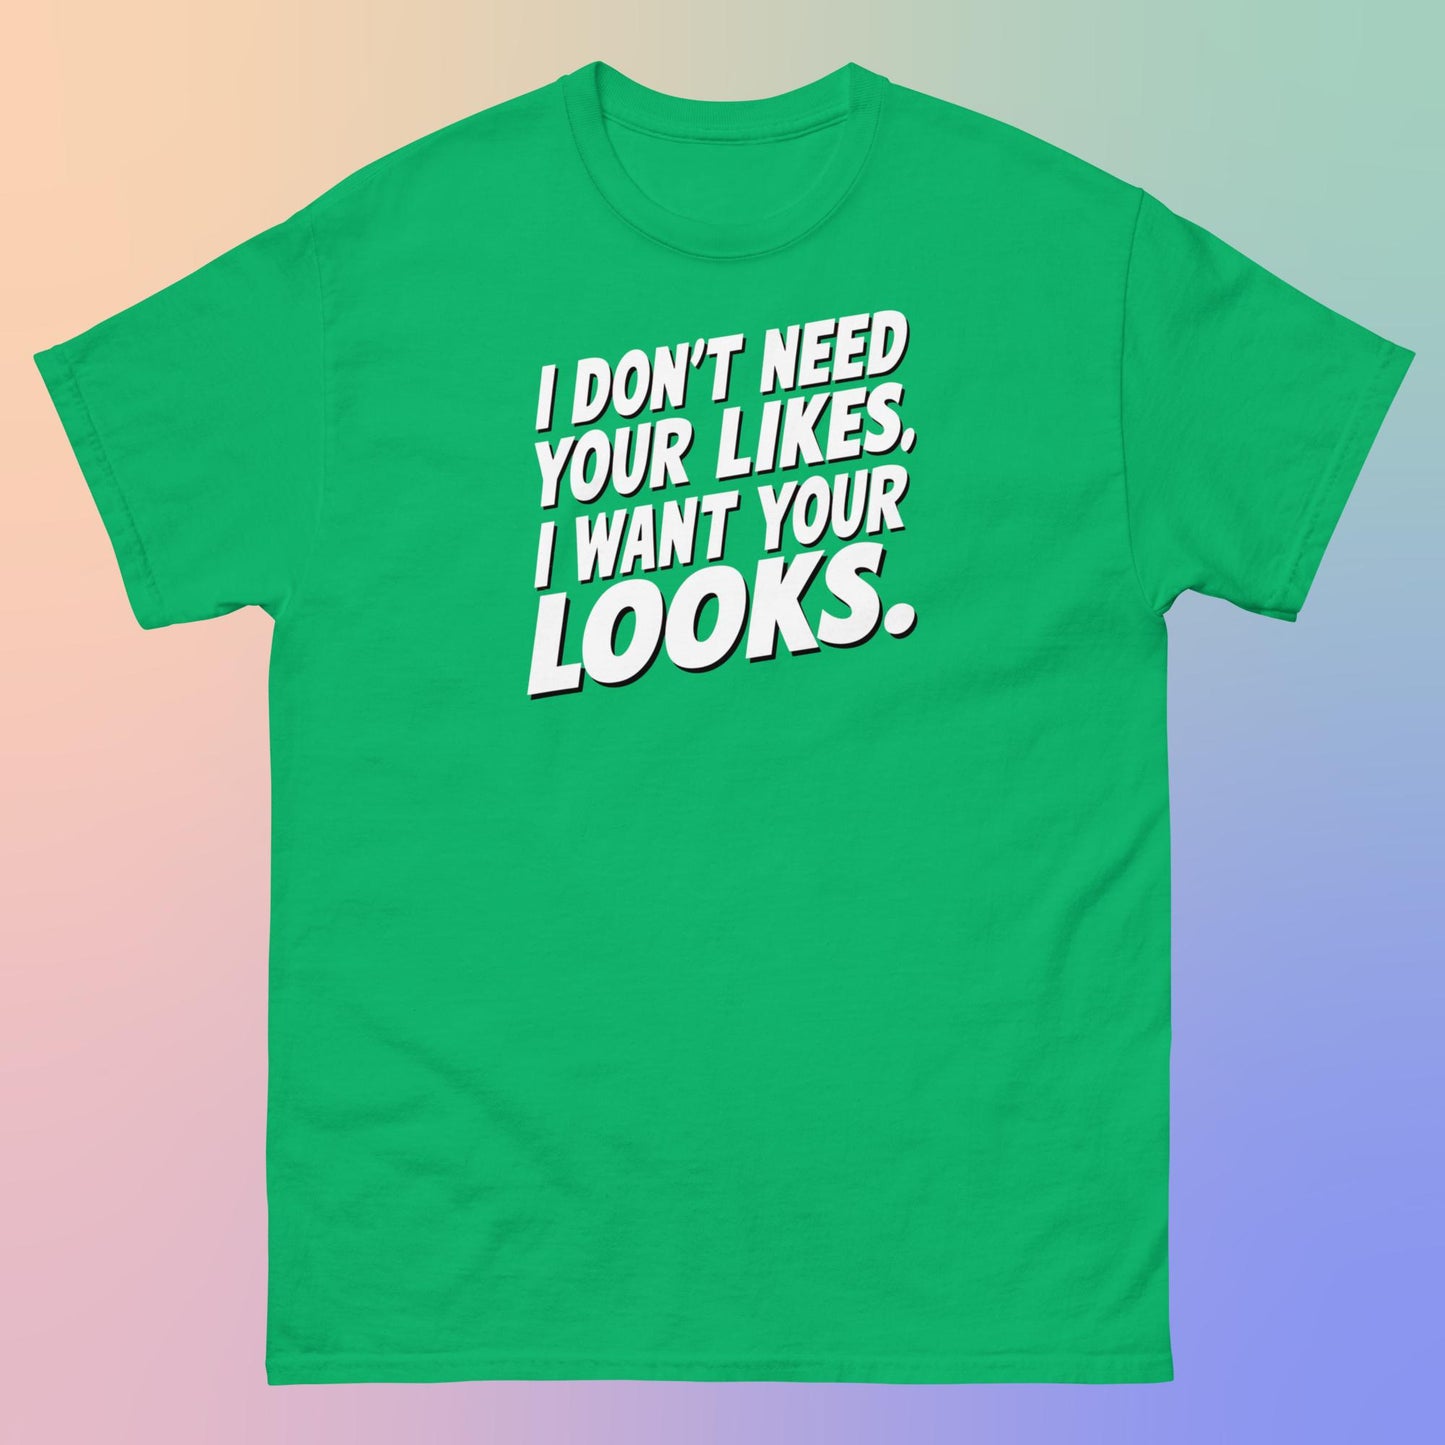 PLUSH BOY I DON'T NEED YOUR LIKES I WANT YOUR LOOKS TEE